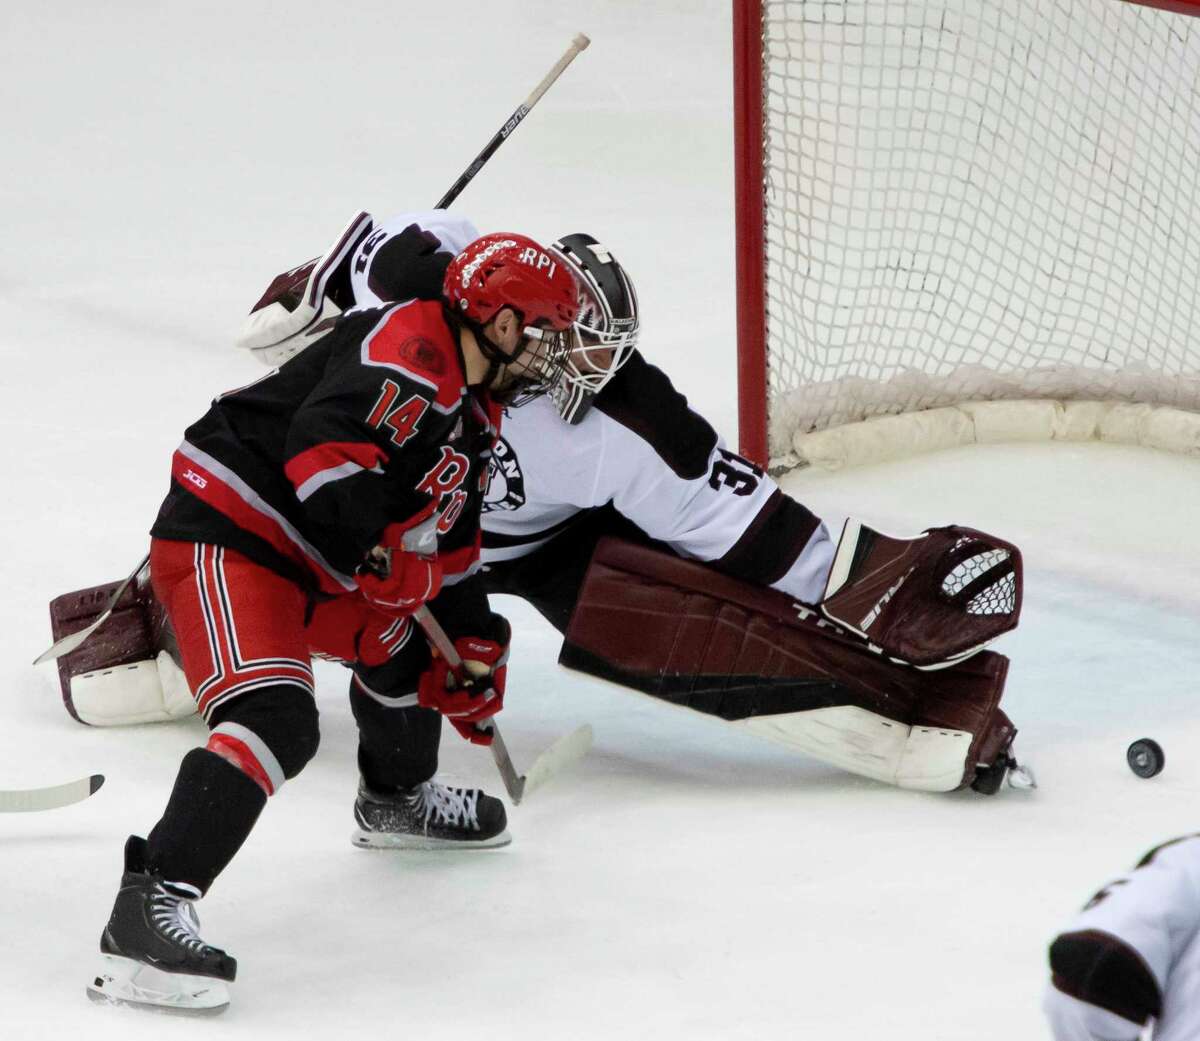 RPI forward Zach Dubinsky looks on as the puck slides into the goal past Union goaltender Connor Murphy RPI during a game Saturday night, Oct. 30, 2021, at Rensselaer Polytechnic Institute in Troy, N.Y. (Jenn March, Special to the Times Union)